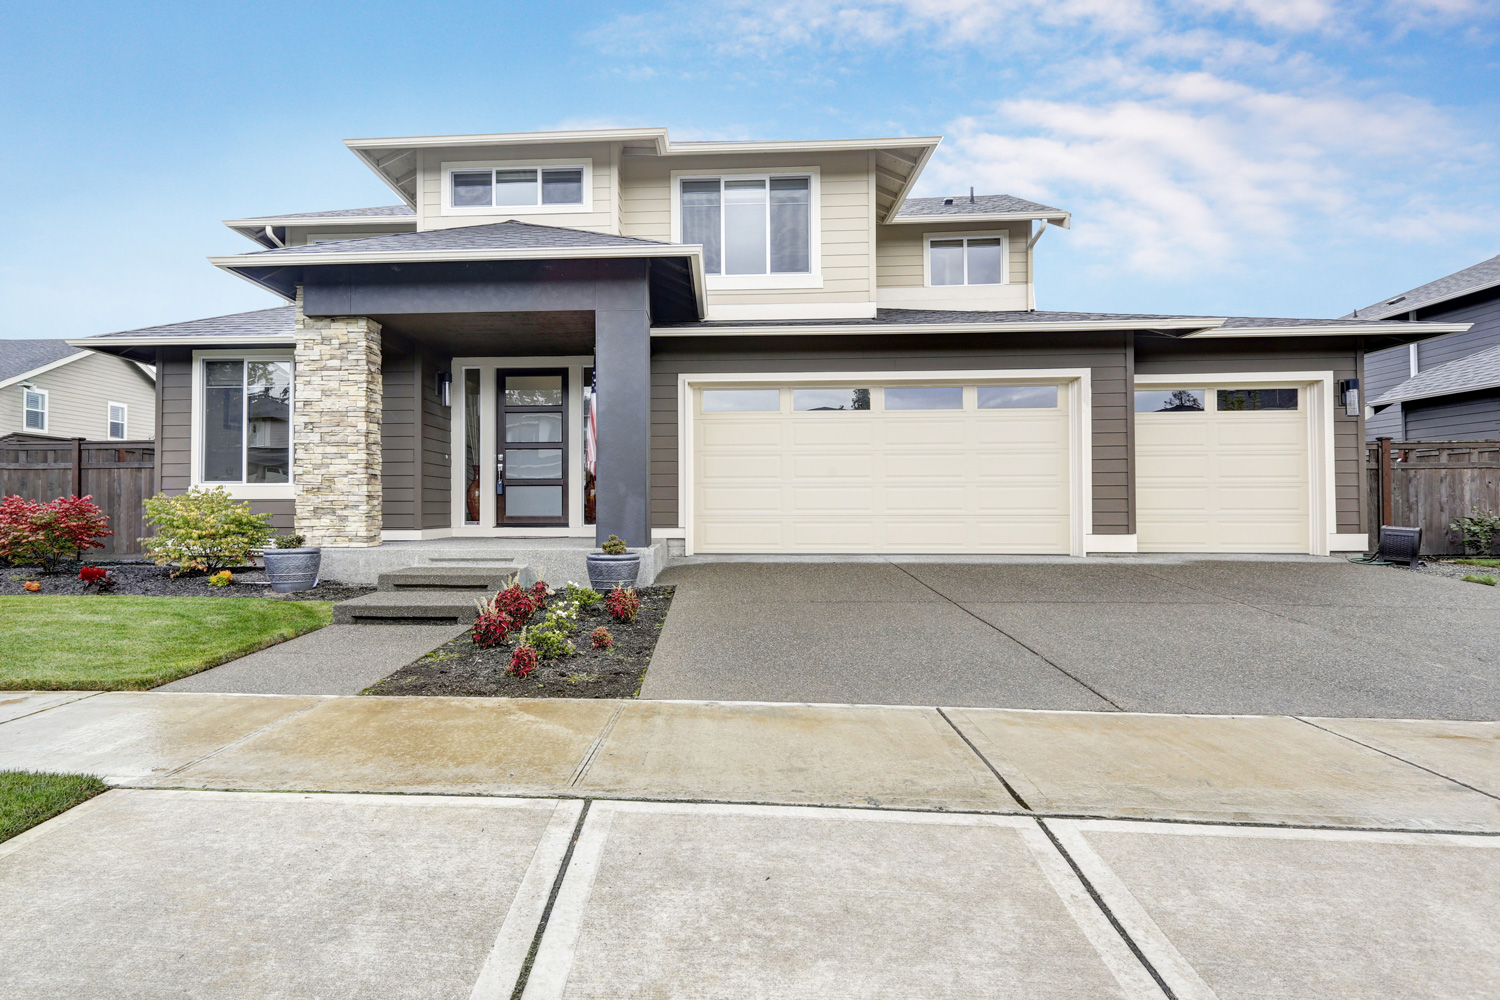 Curb appeal of brand-new home in brown and beige colors with two garages and concrete driveway.